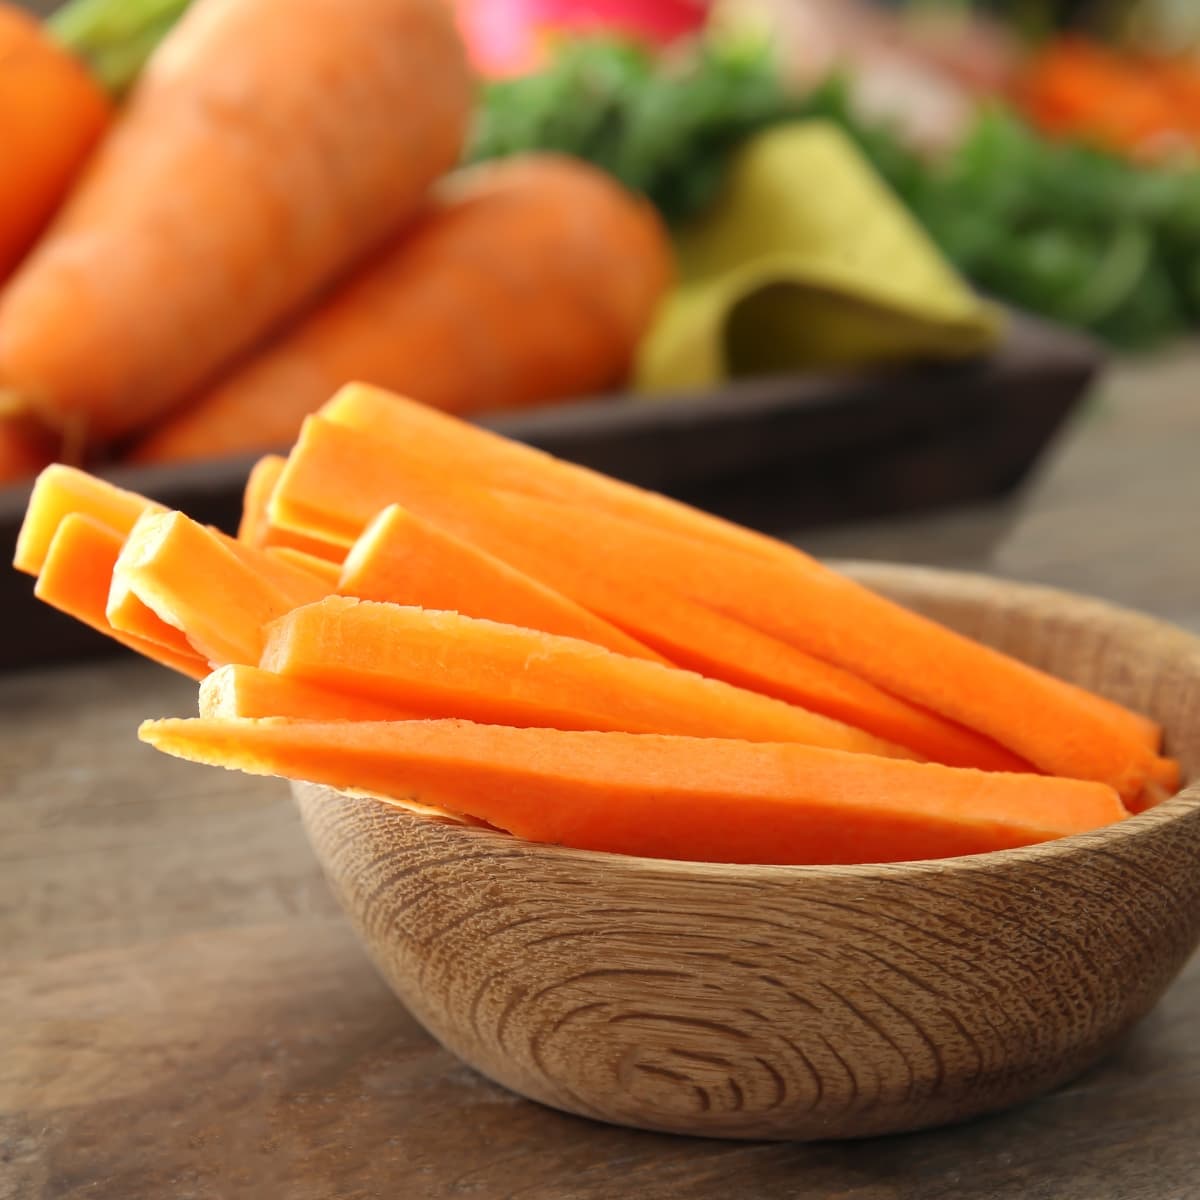 Raw Carrot Sticks in a Wooden Bowl on a Wooden Table with Whole Raw Carrots in the Background